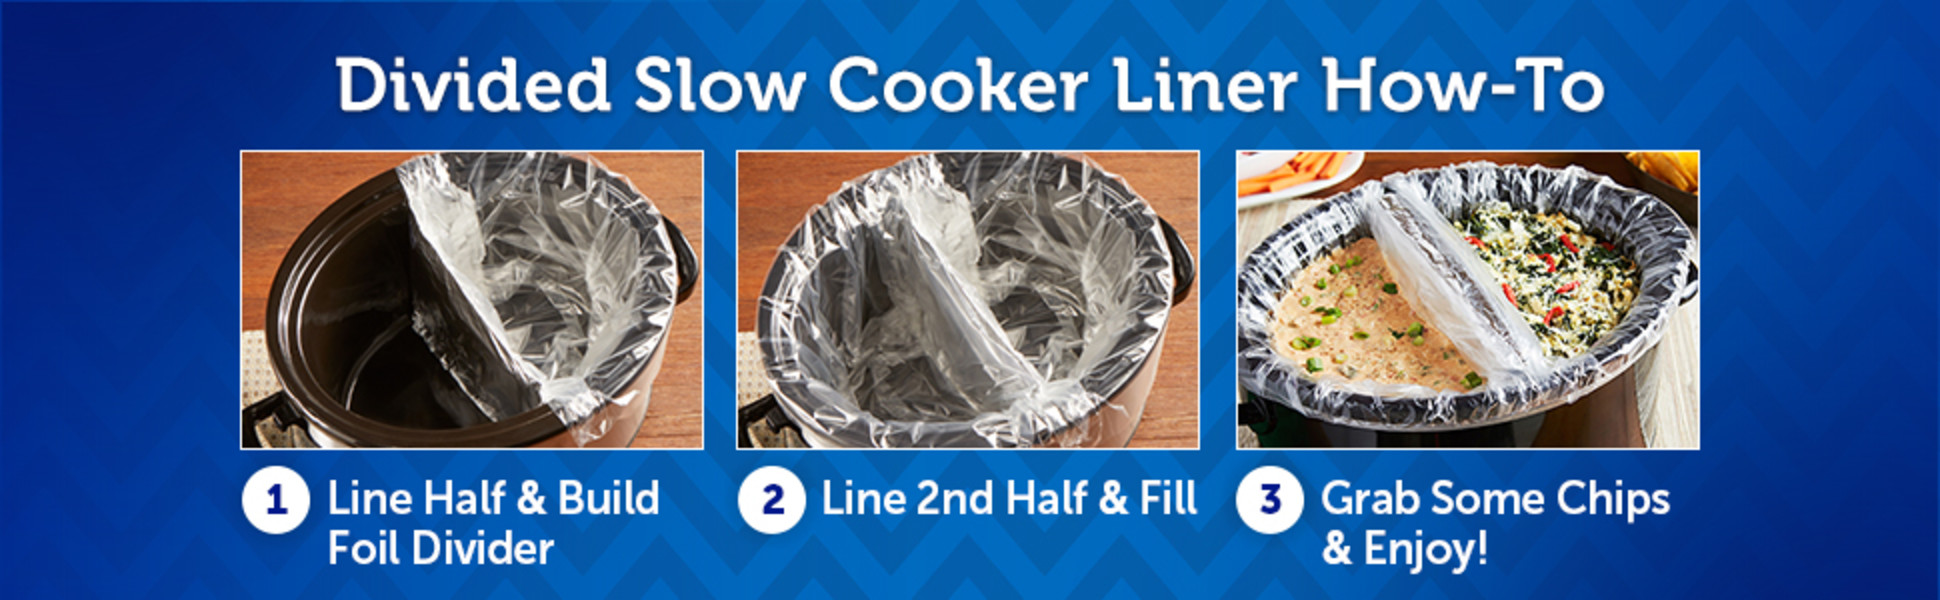 10/15/20 Count Slow Cooker Liners, Cooking Bags Large Size Crock Pot Liners  Disposable Pot Liners Plastic Bags, Size, Fit 3qt To 8qt For Slow Cooker  Crockpot Cooking Trays - Temu